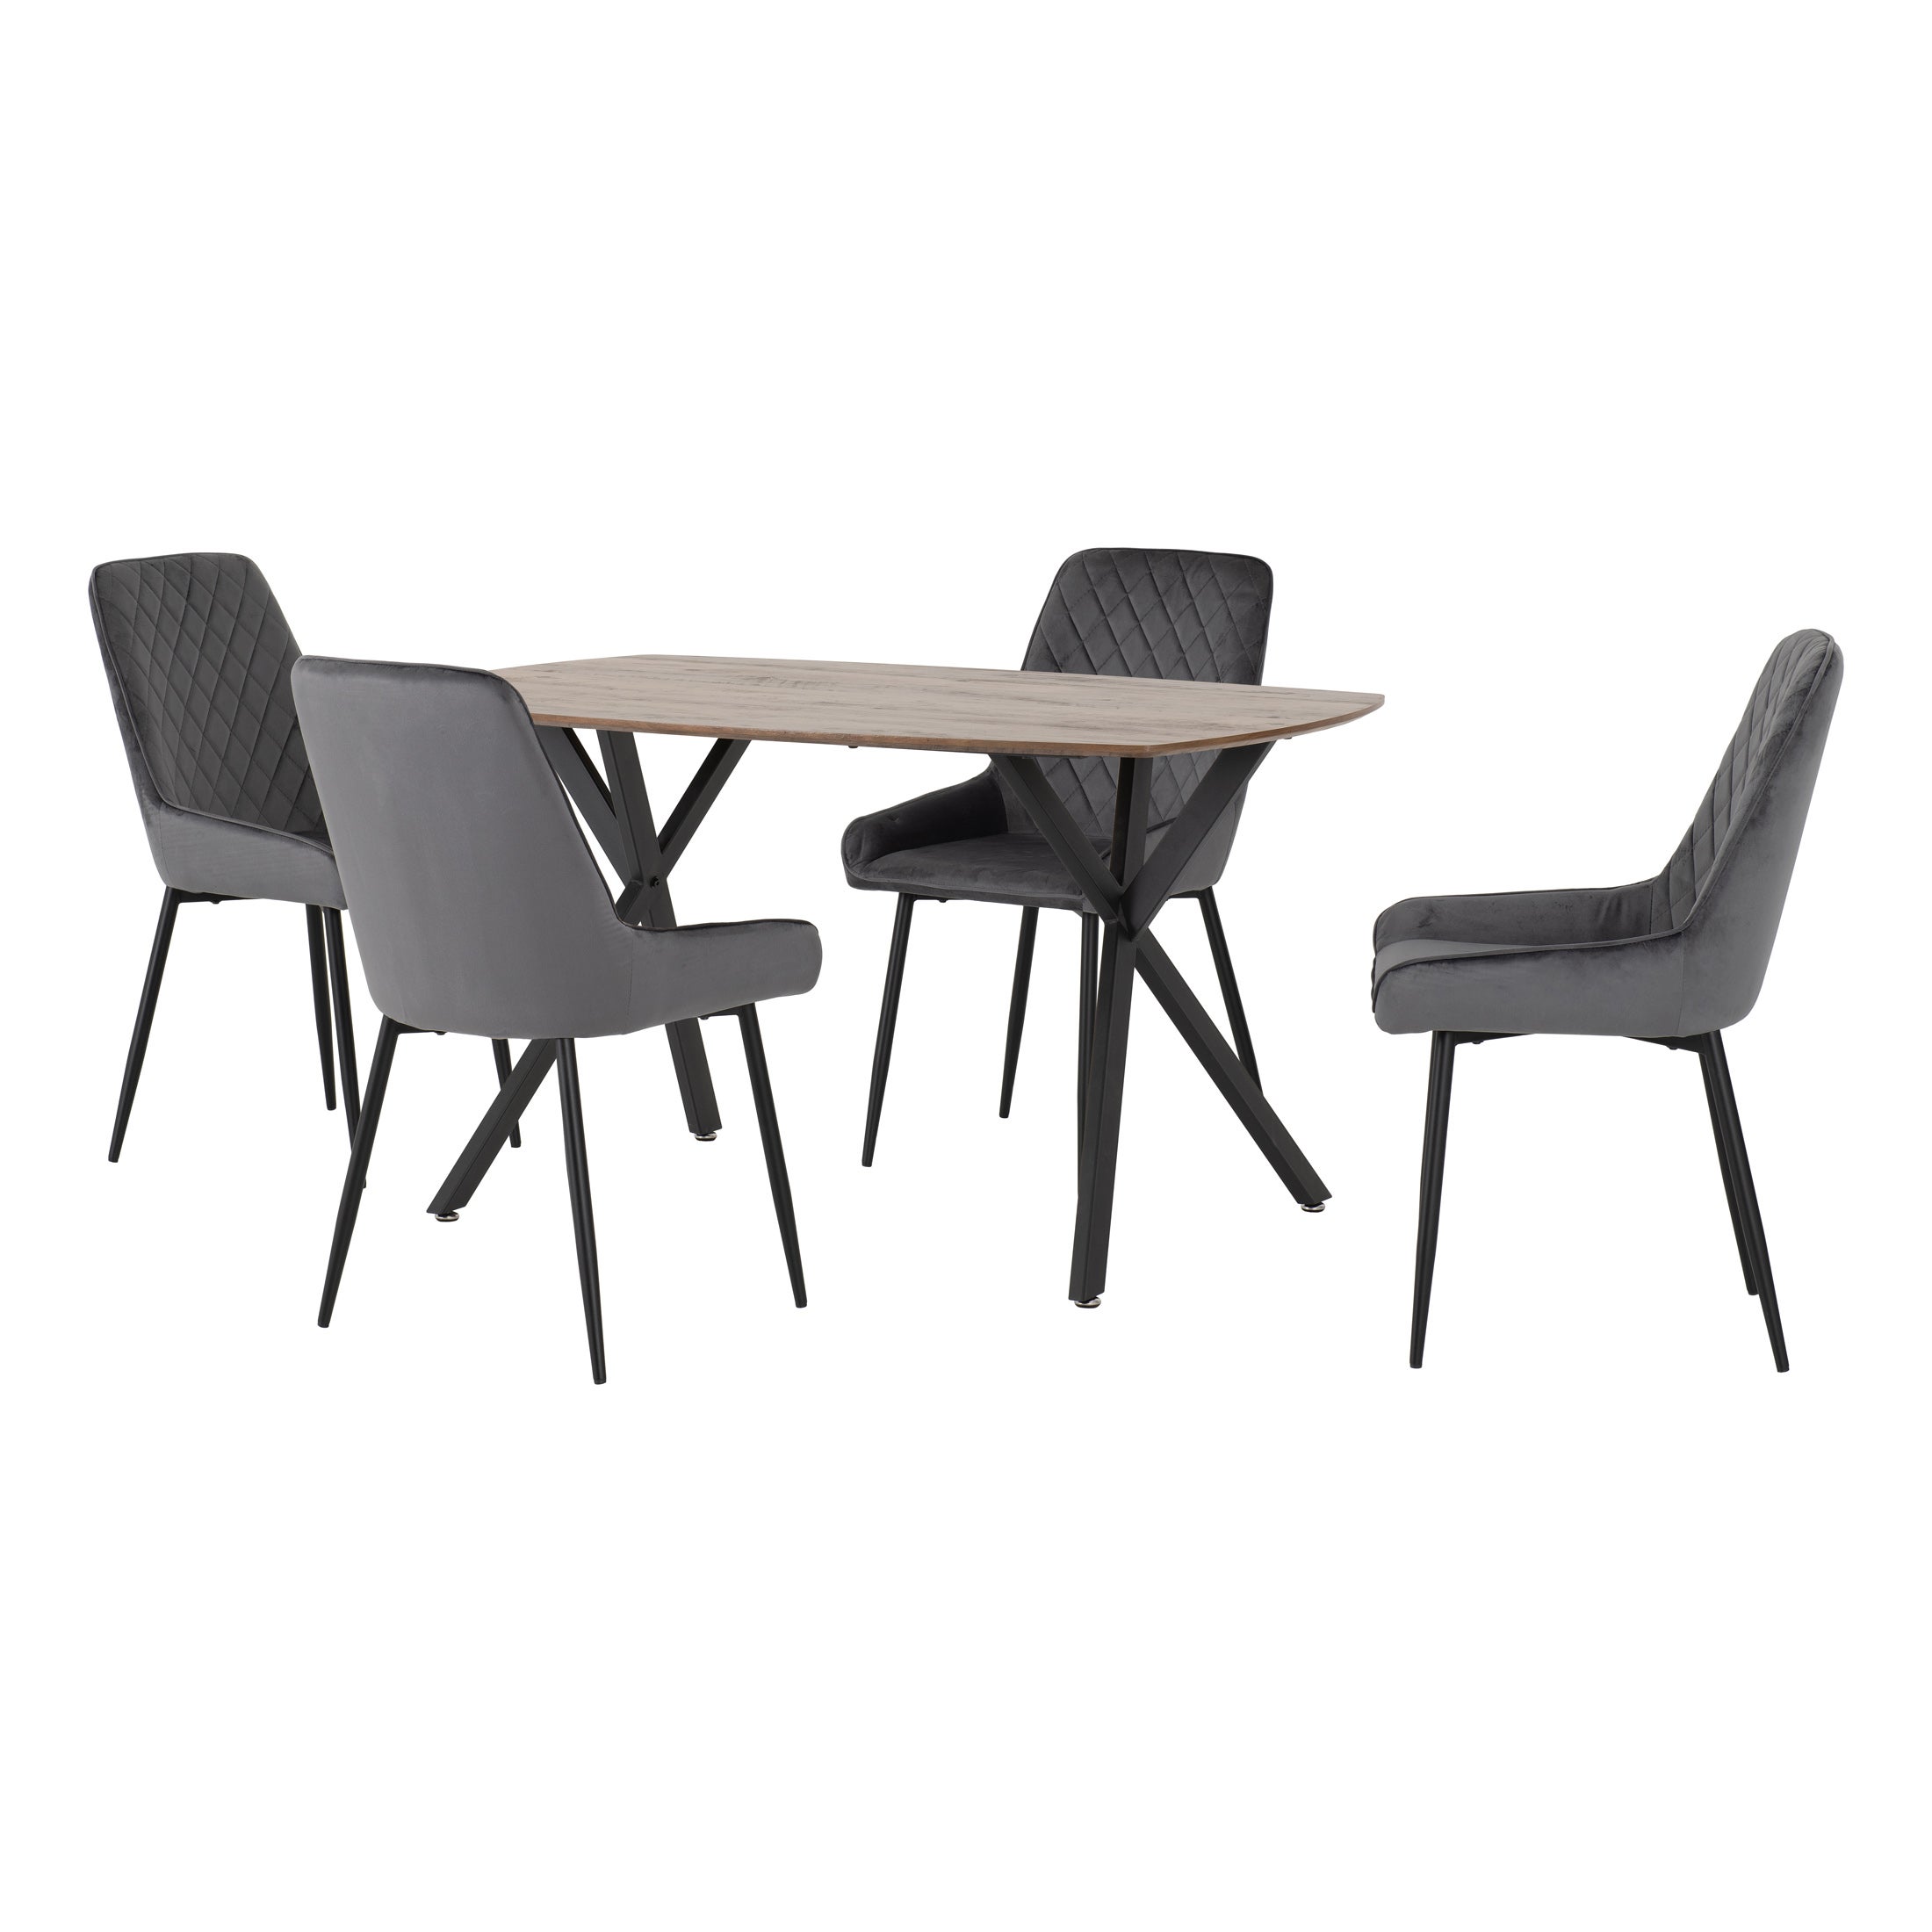 Athens Rectangular Dining Table with 4 Avery Chairs, Oak Effect Grey